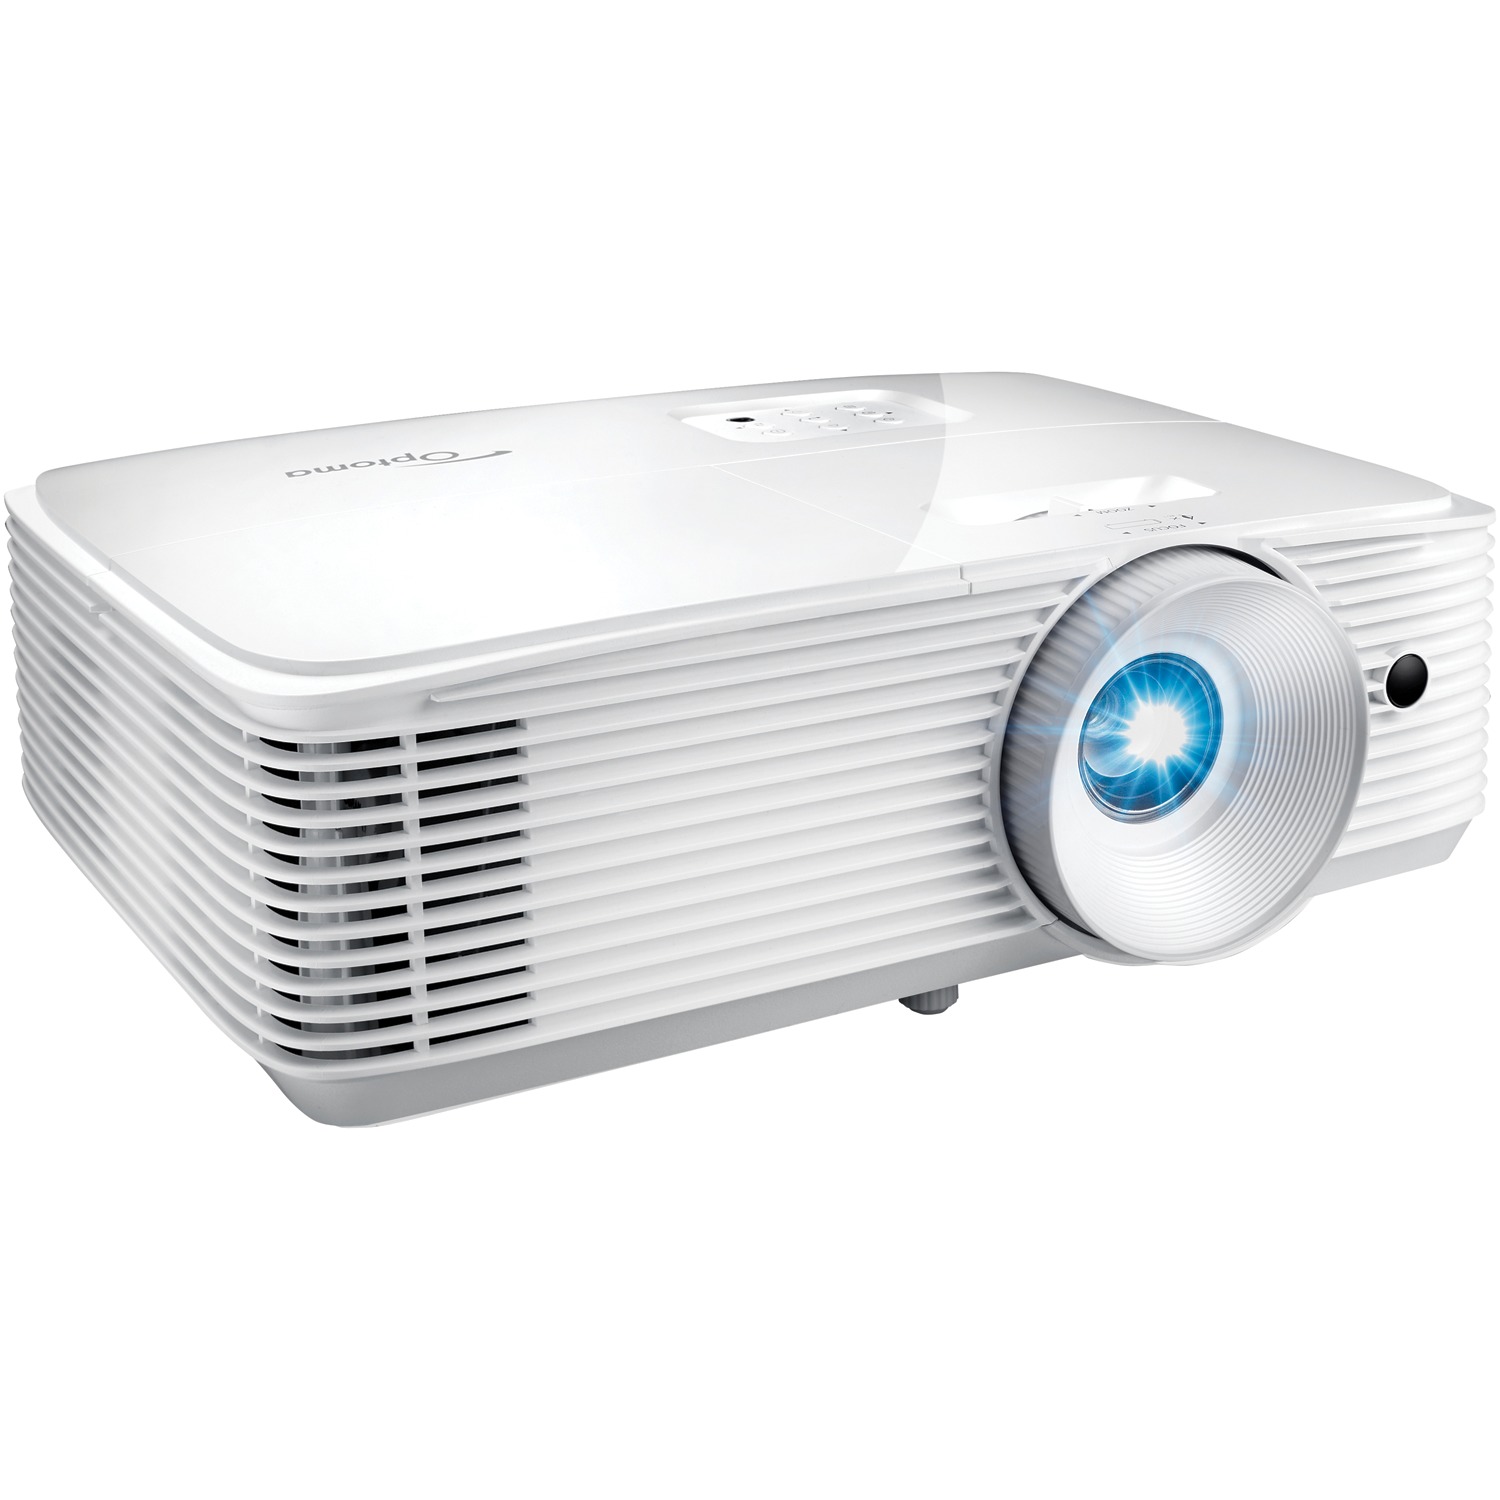 Optoma X343 3600 Lumens XGA DLP Projector with 15,000-hour Lamp Life - image 3 of 5